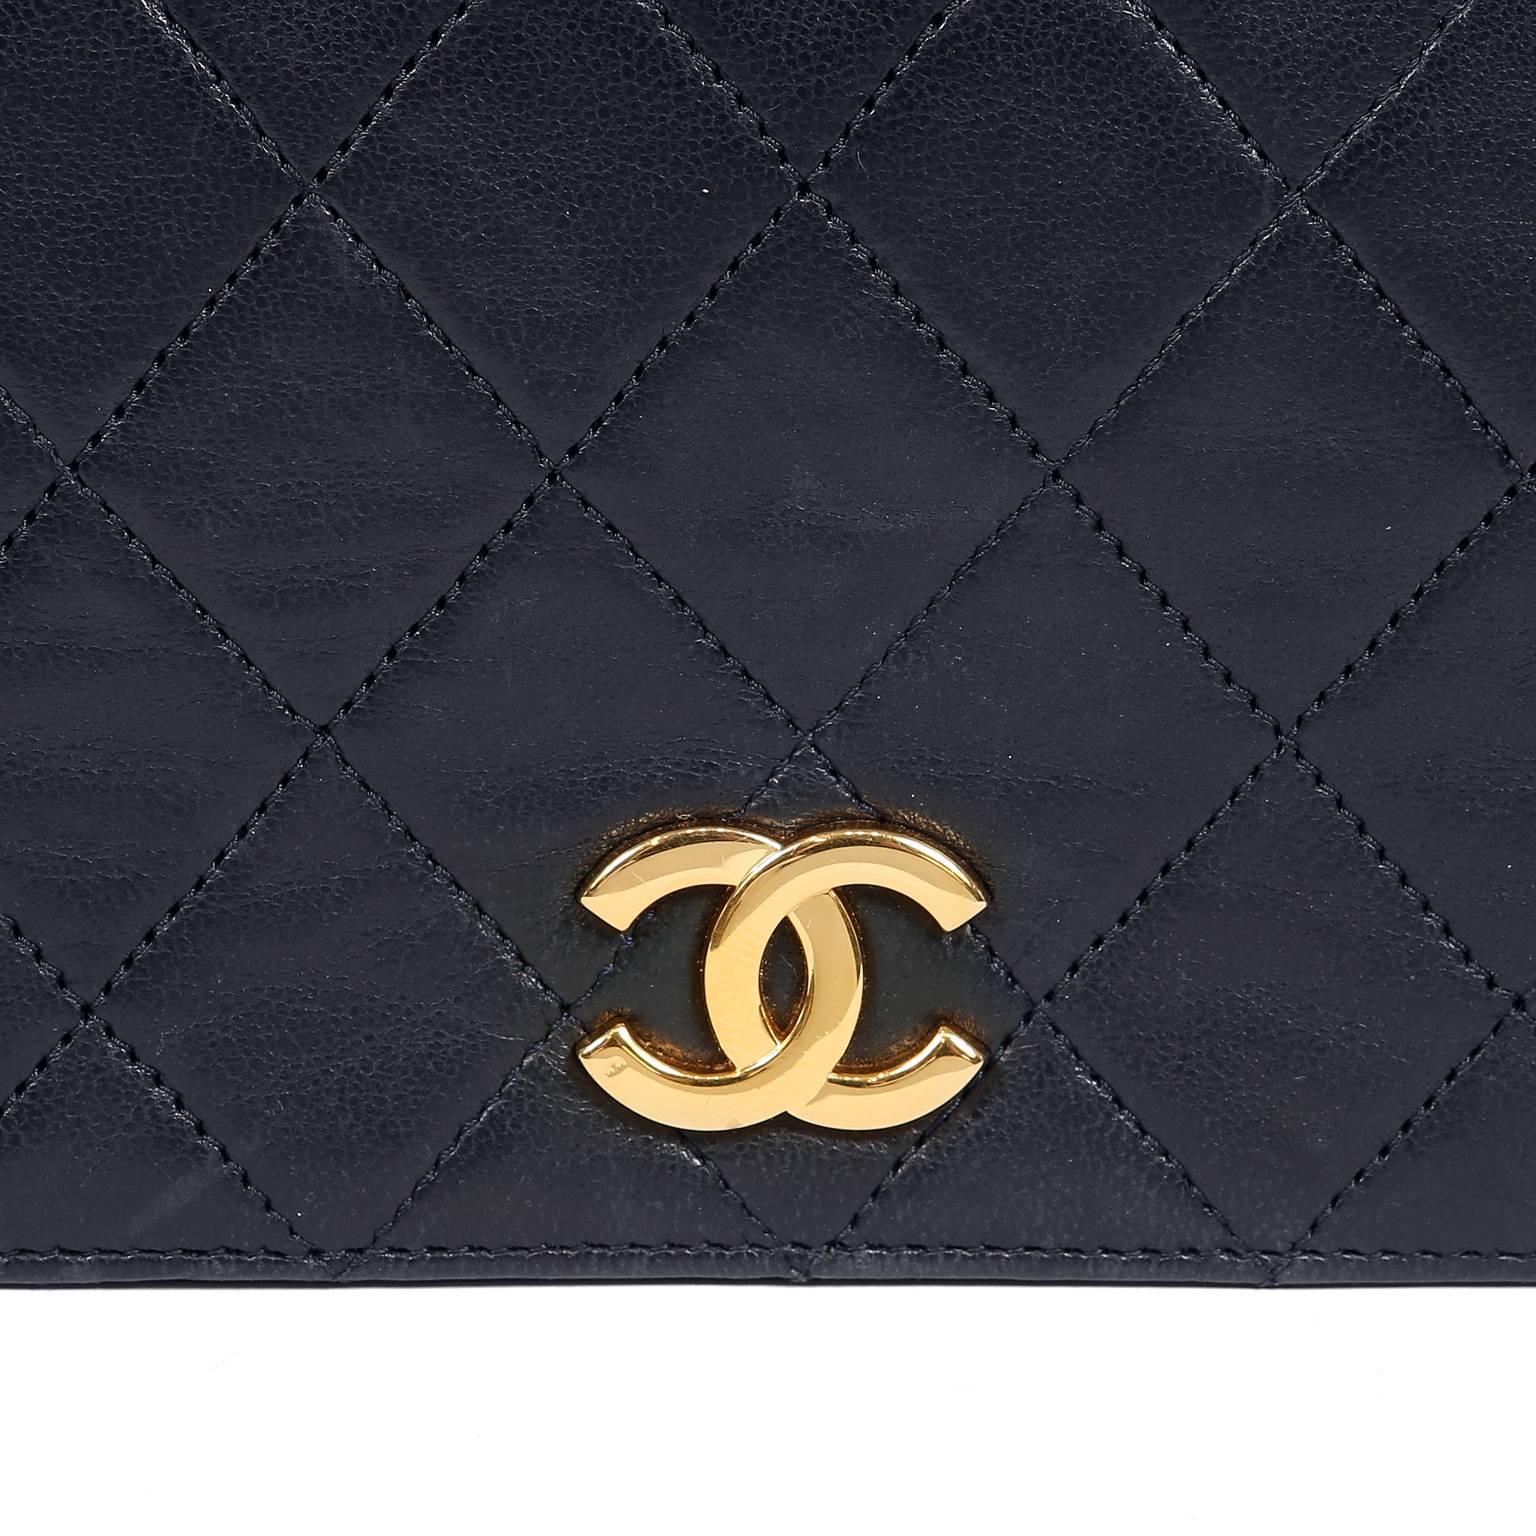 Chanel Black Leather Vintage Clutch with Strap 2